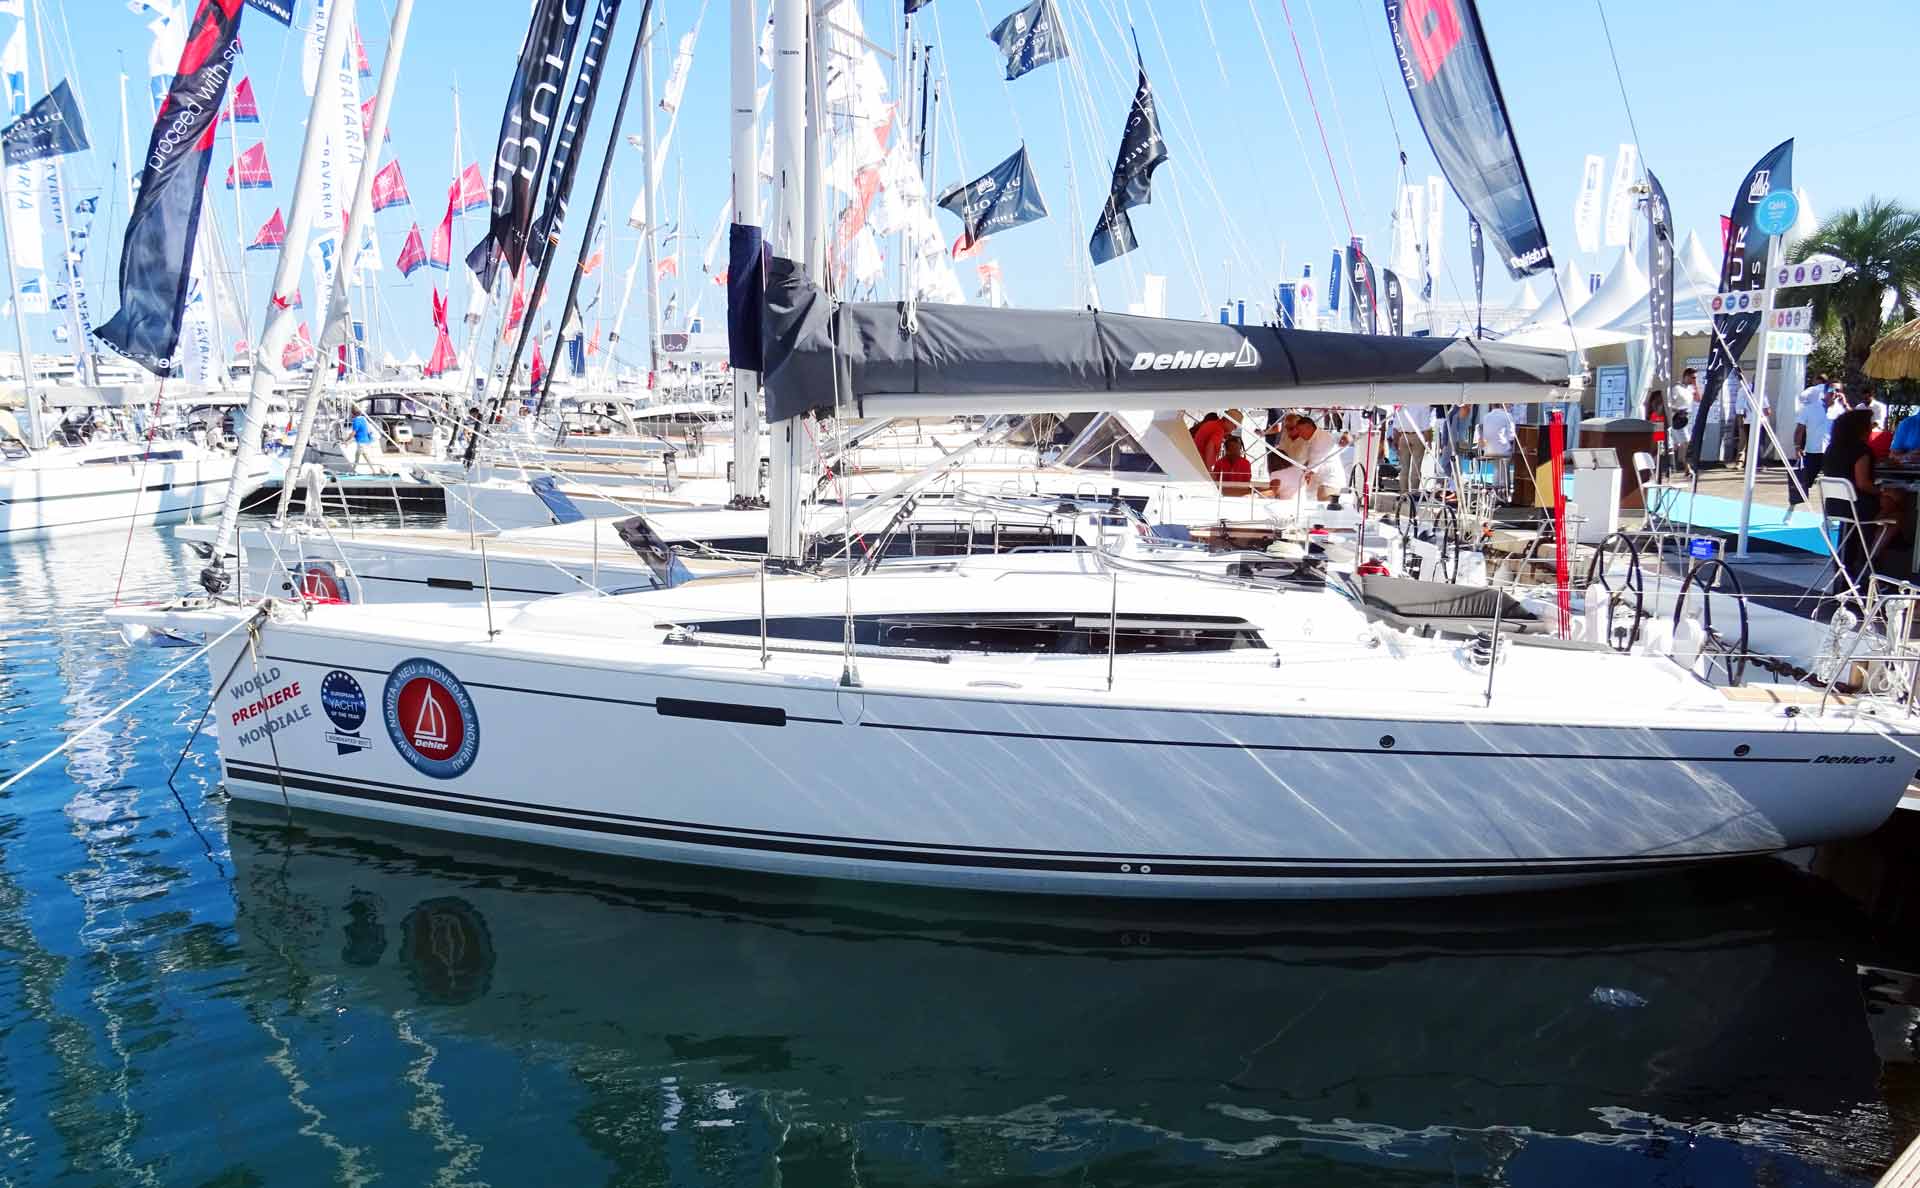 Certainly one of the smallest yachts at Cannes Yachting Festival: The Dehler 34